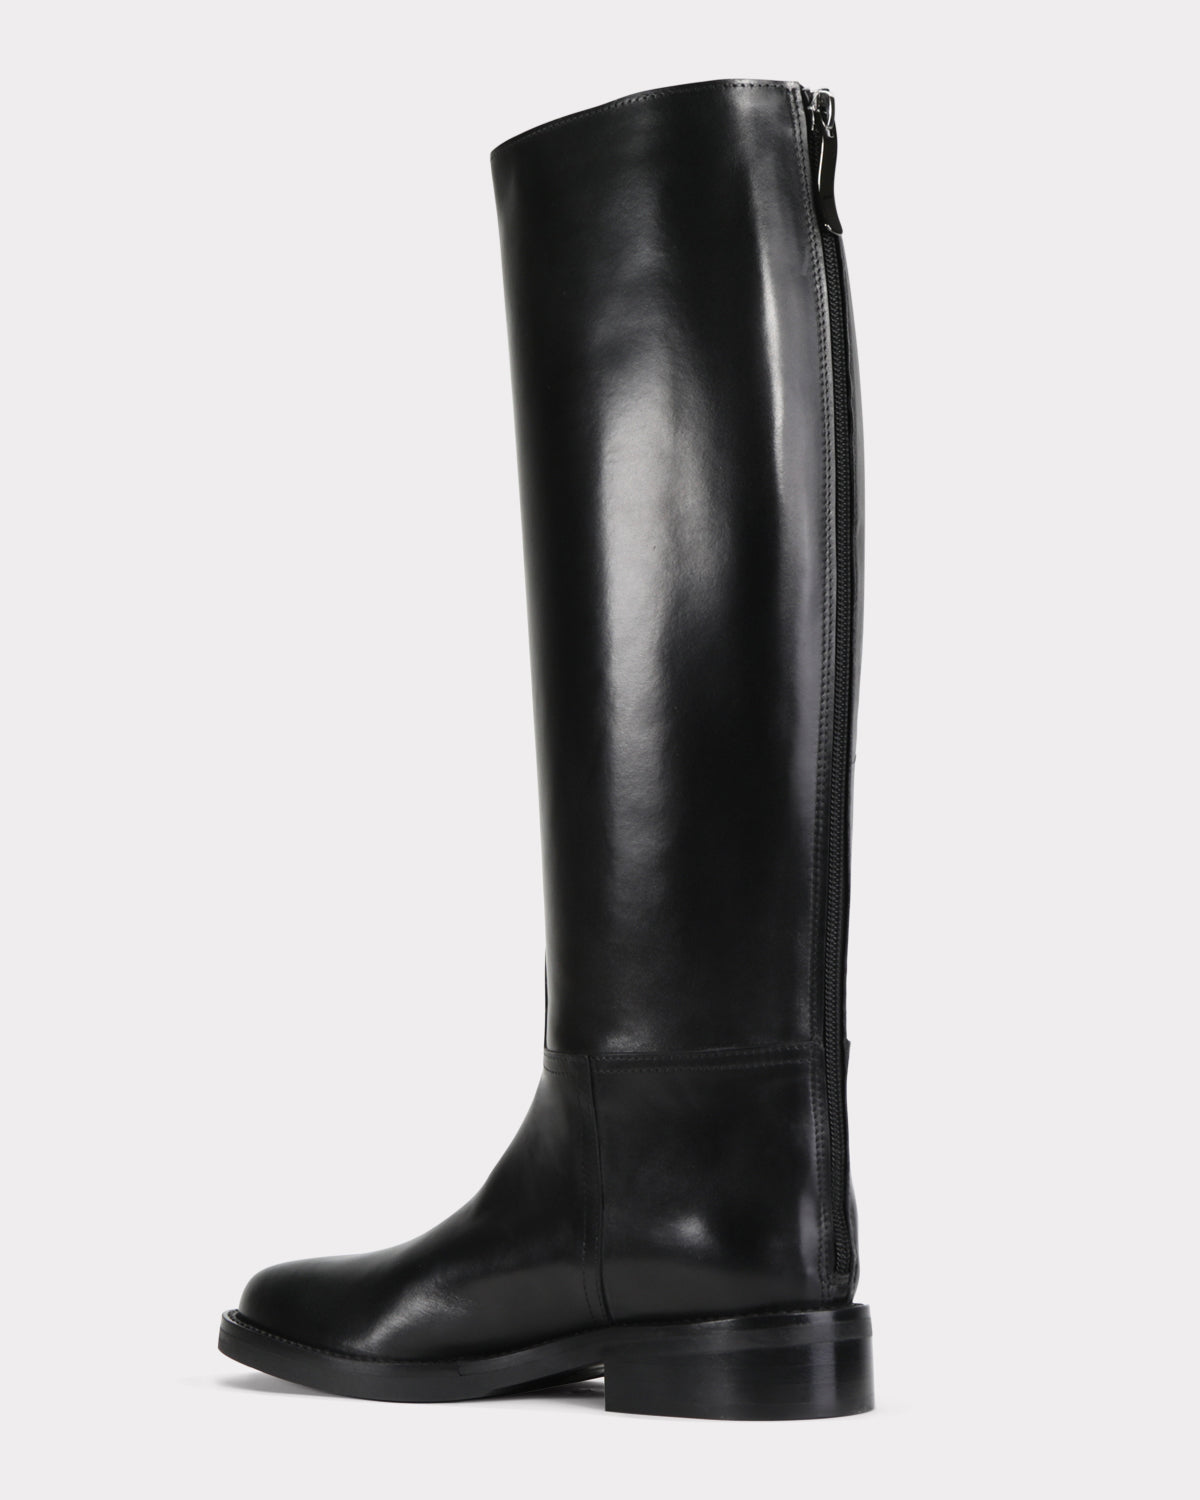 black leather knee high riding boot made from recycled materials